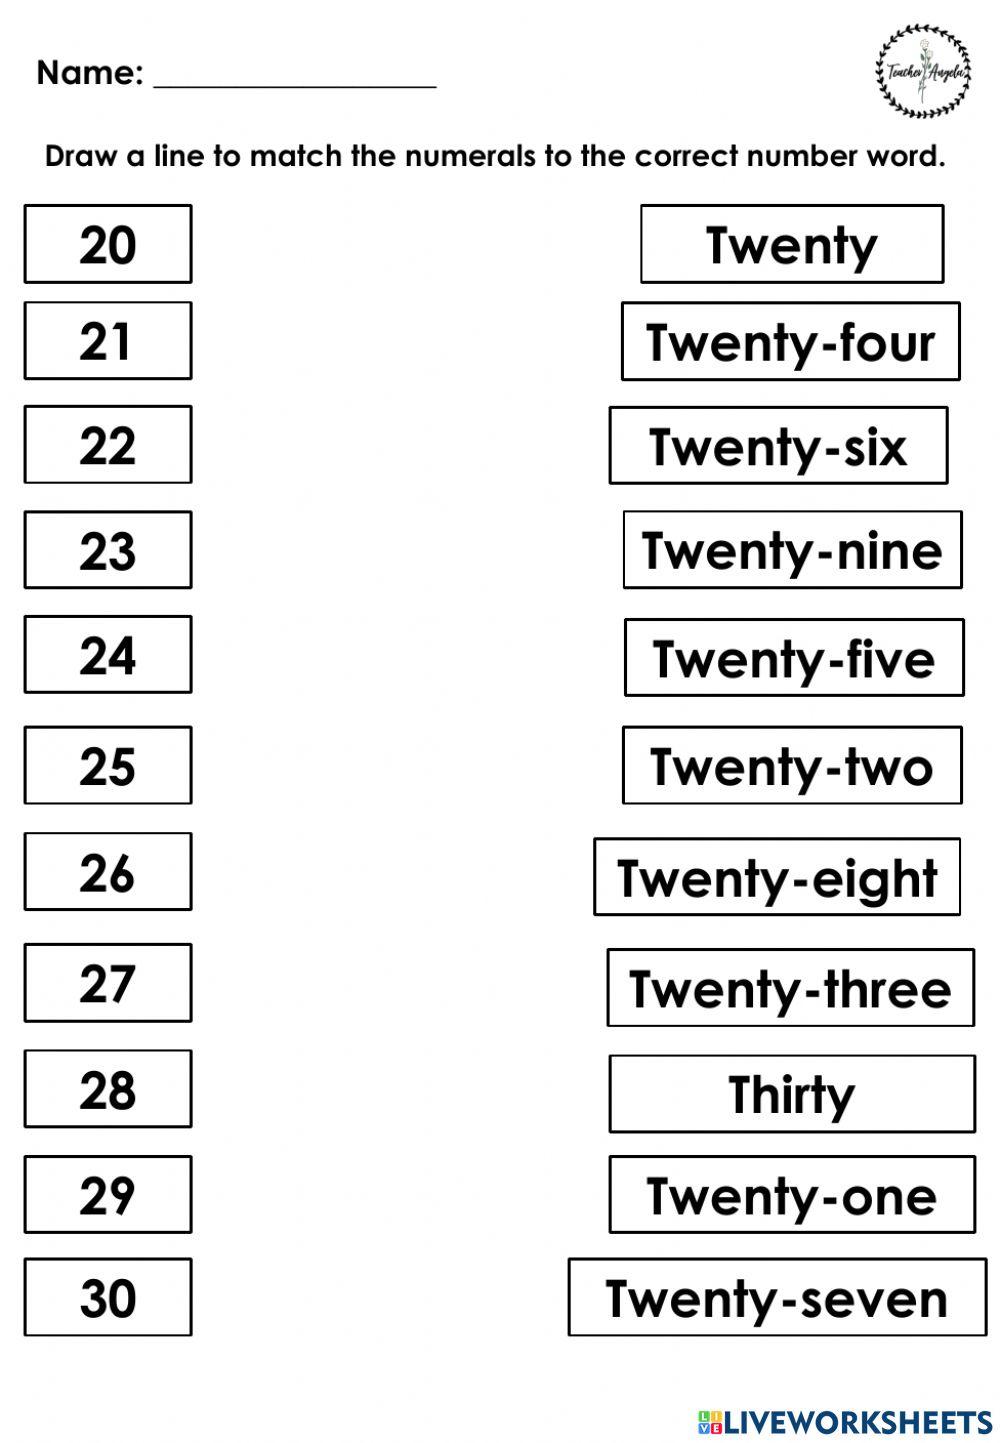 Matching number names and numerals 21-30